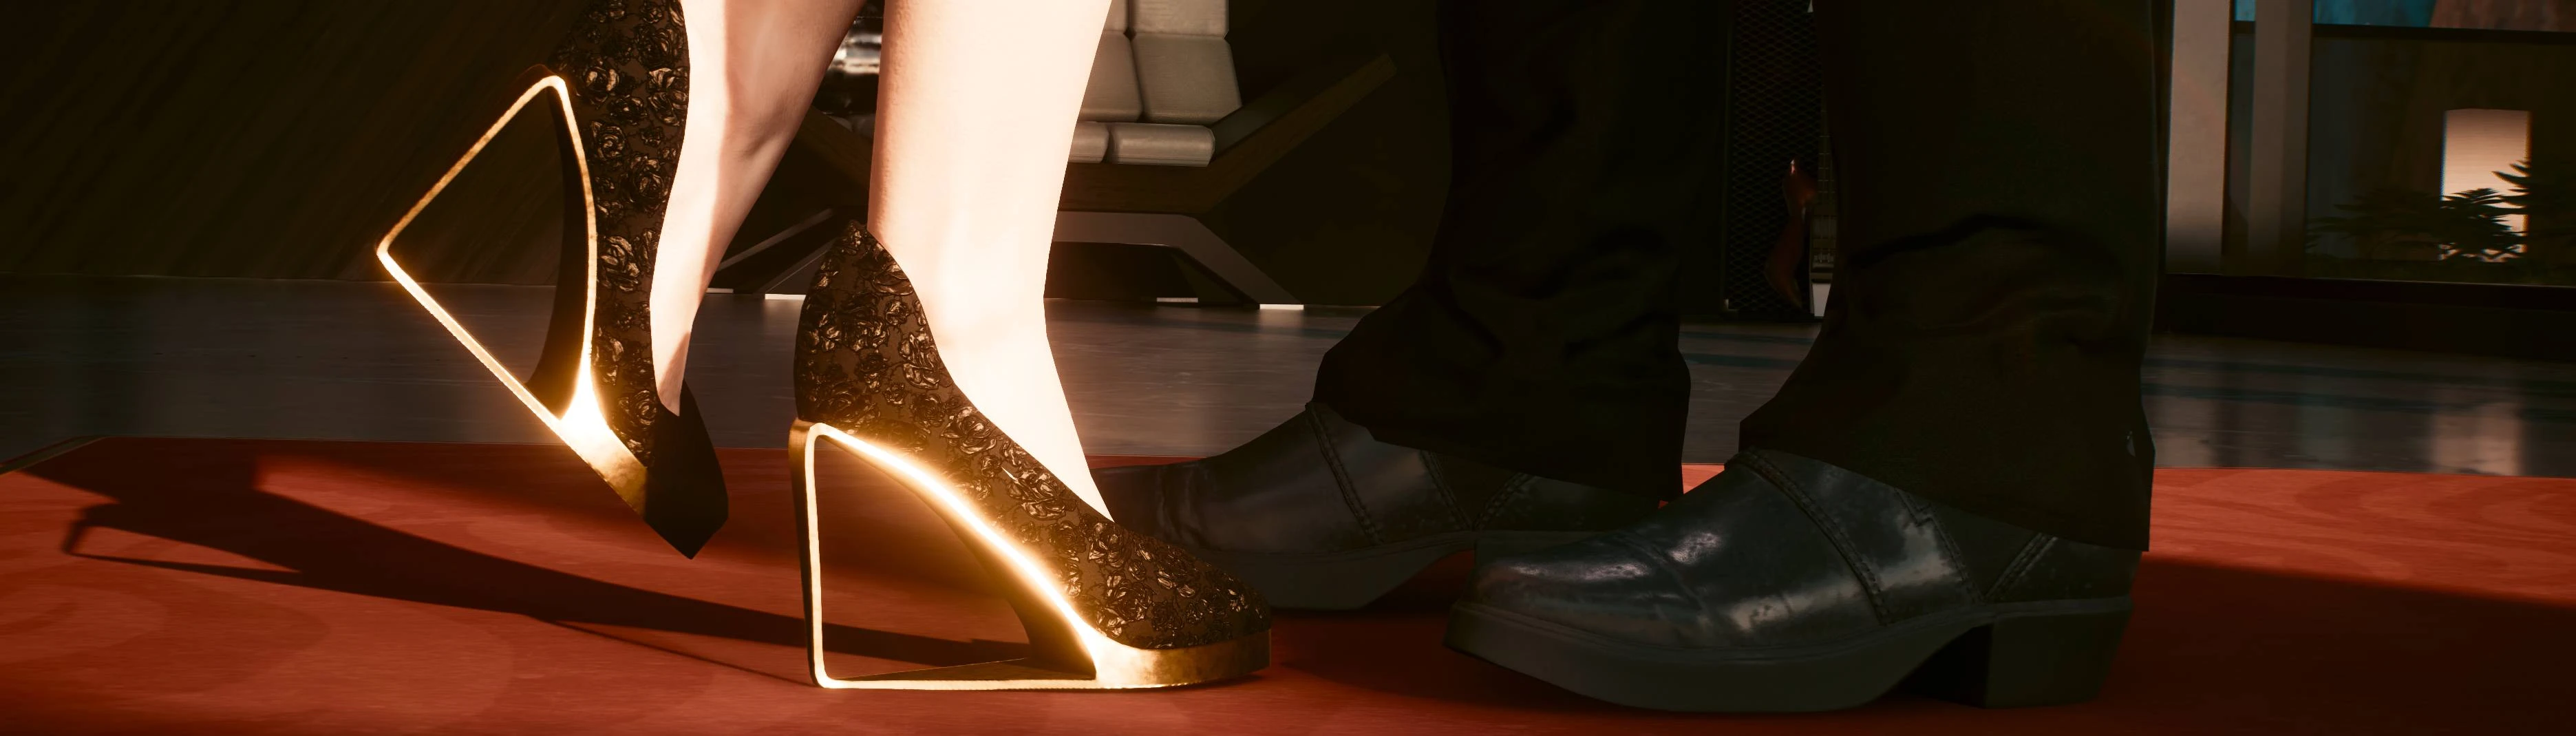 Classy High Heels ArchiveXL - EEX Compatible - Includes Toggleable Feet -  Vanilla - Hyst - Solo at Cyberpunk 2077 Nexus - Mods and community